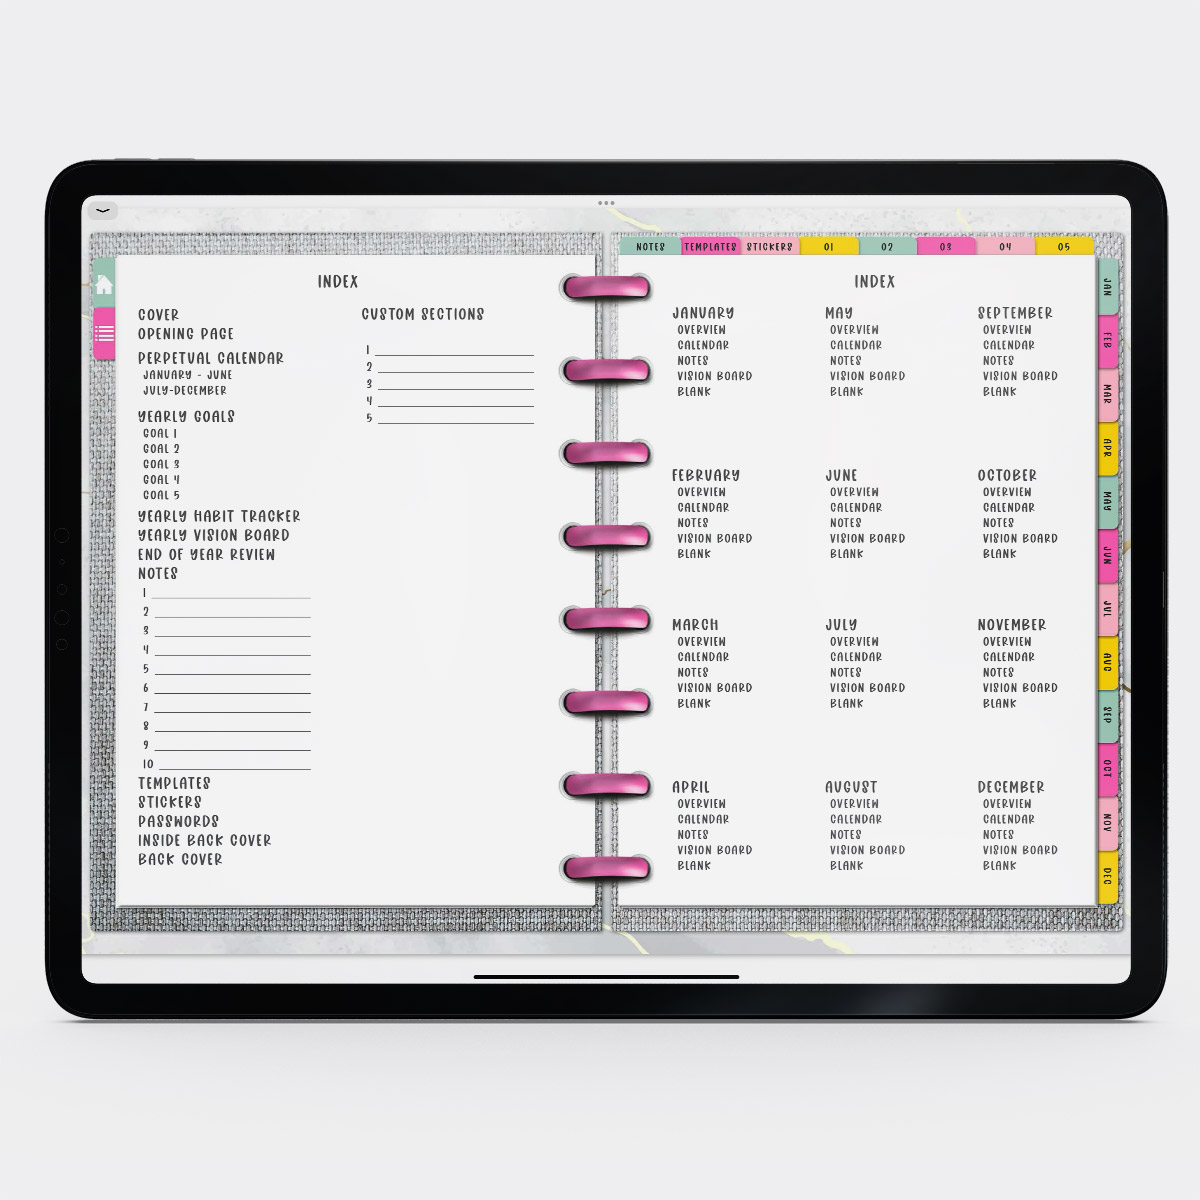 This image shows the free digital planner you can get in this post. It is open to the Index.